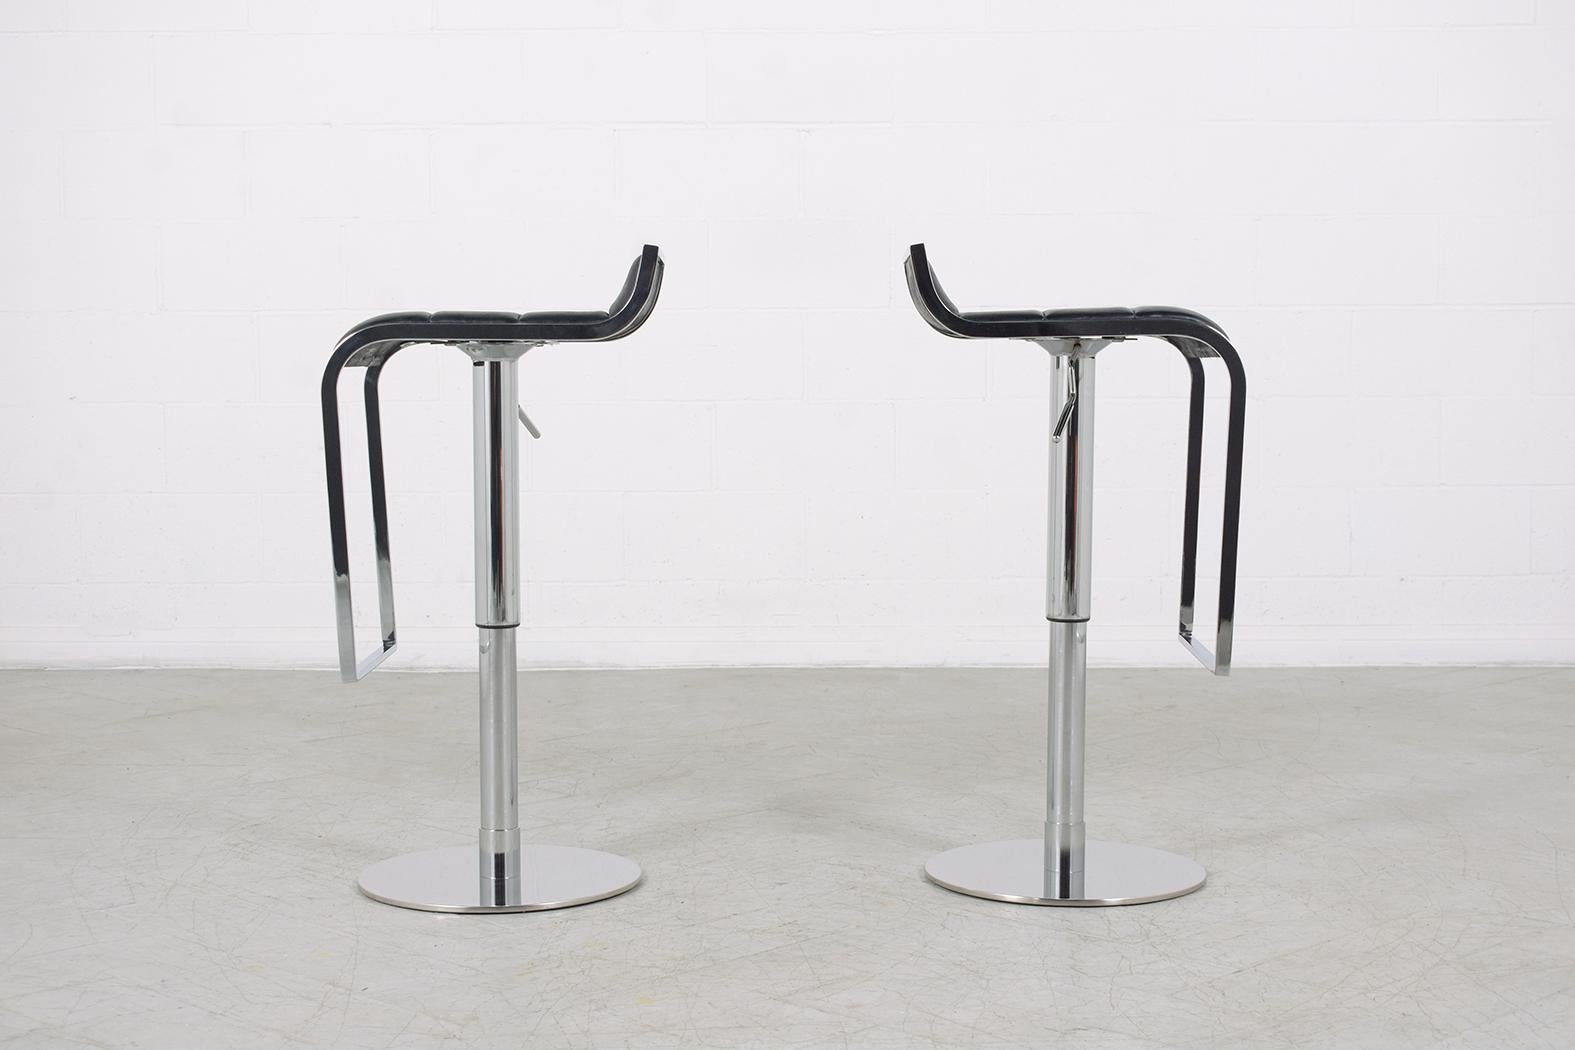 Foam Vintage Mid-Century Modern Chrome Barstools with Black Leather Seats For Sale